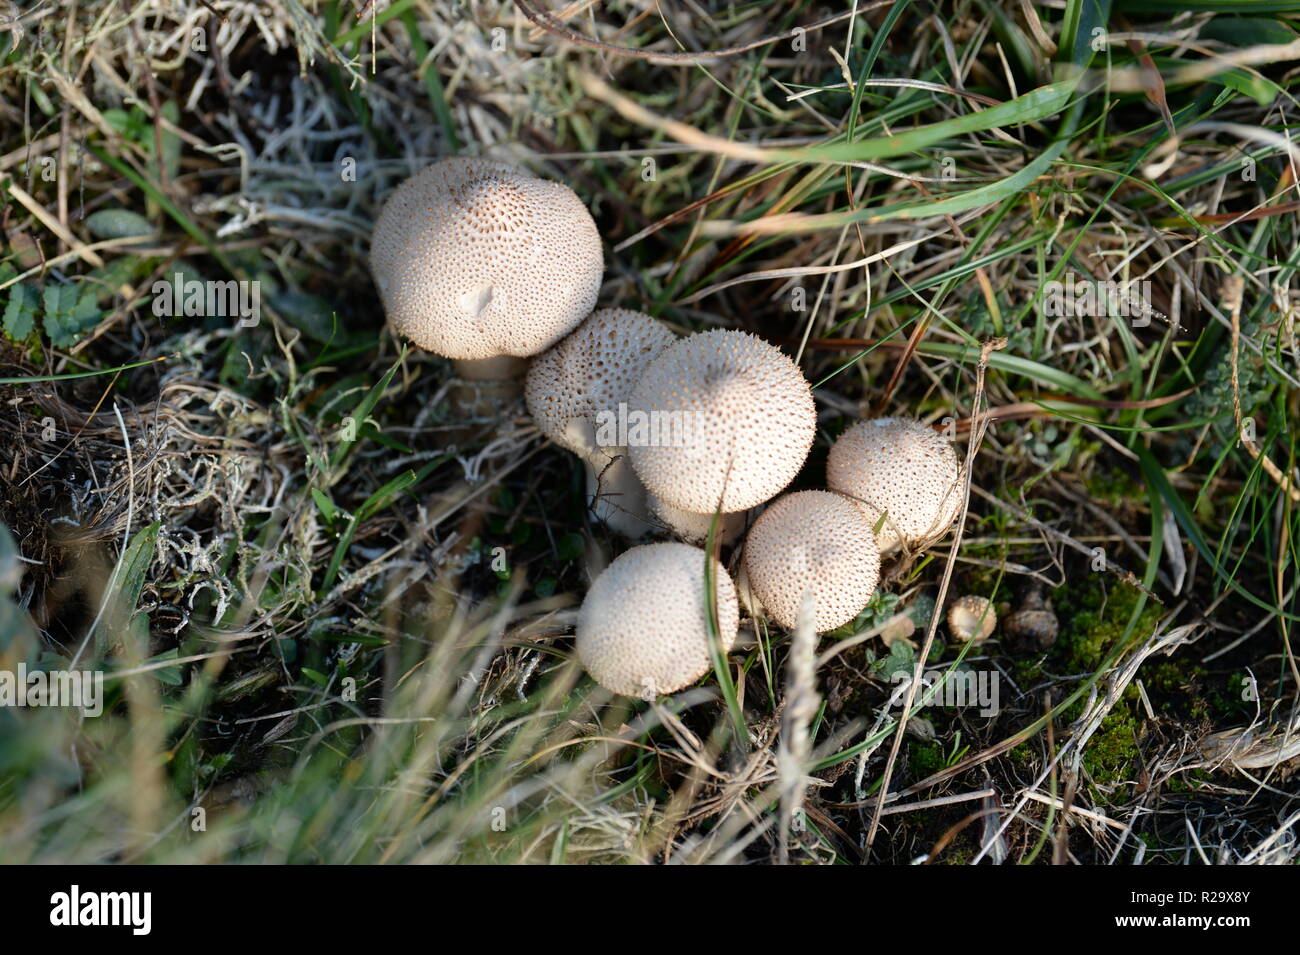 A clump of young Puffballs on grassland cliff face, Gower UK with central swelling at point of release of spores. Stock Photo